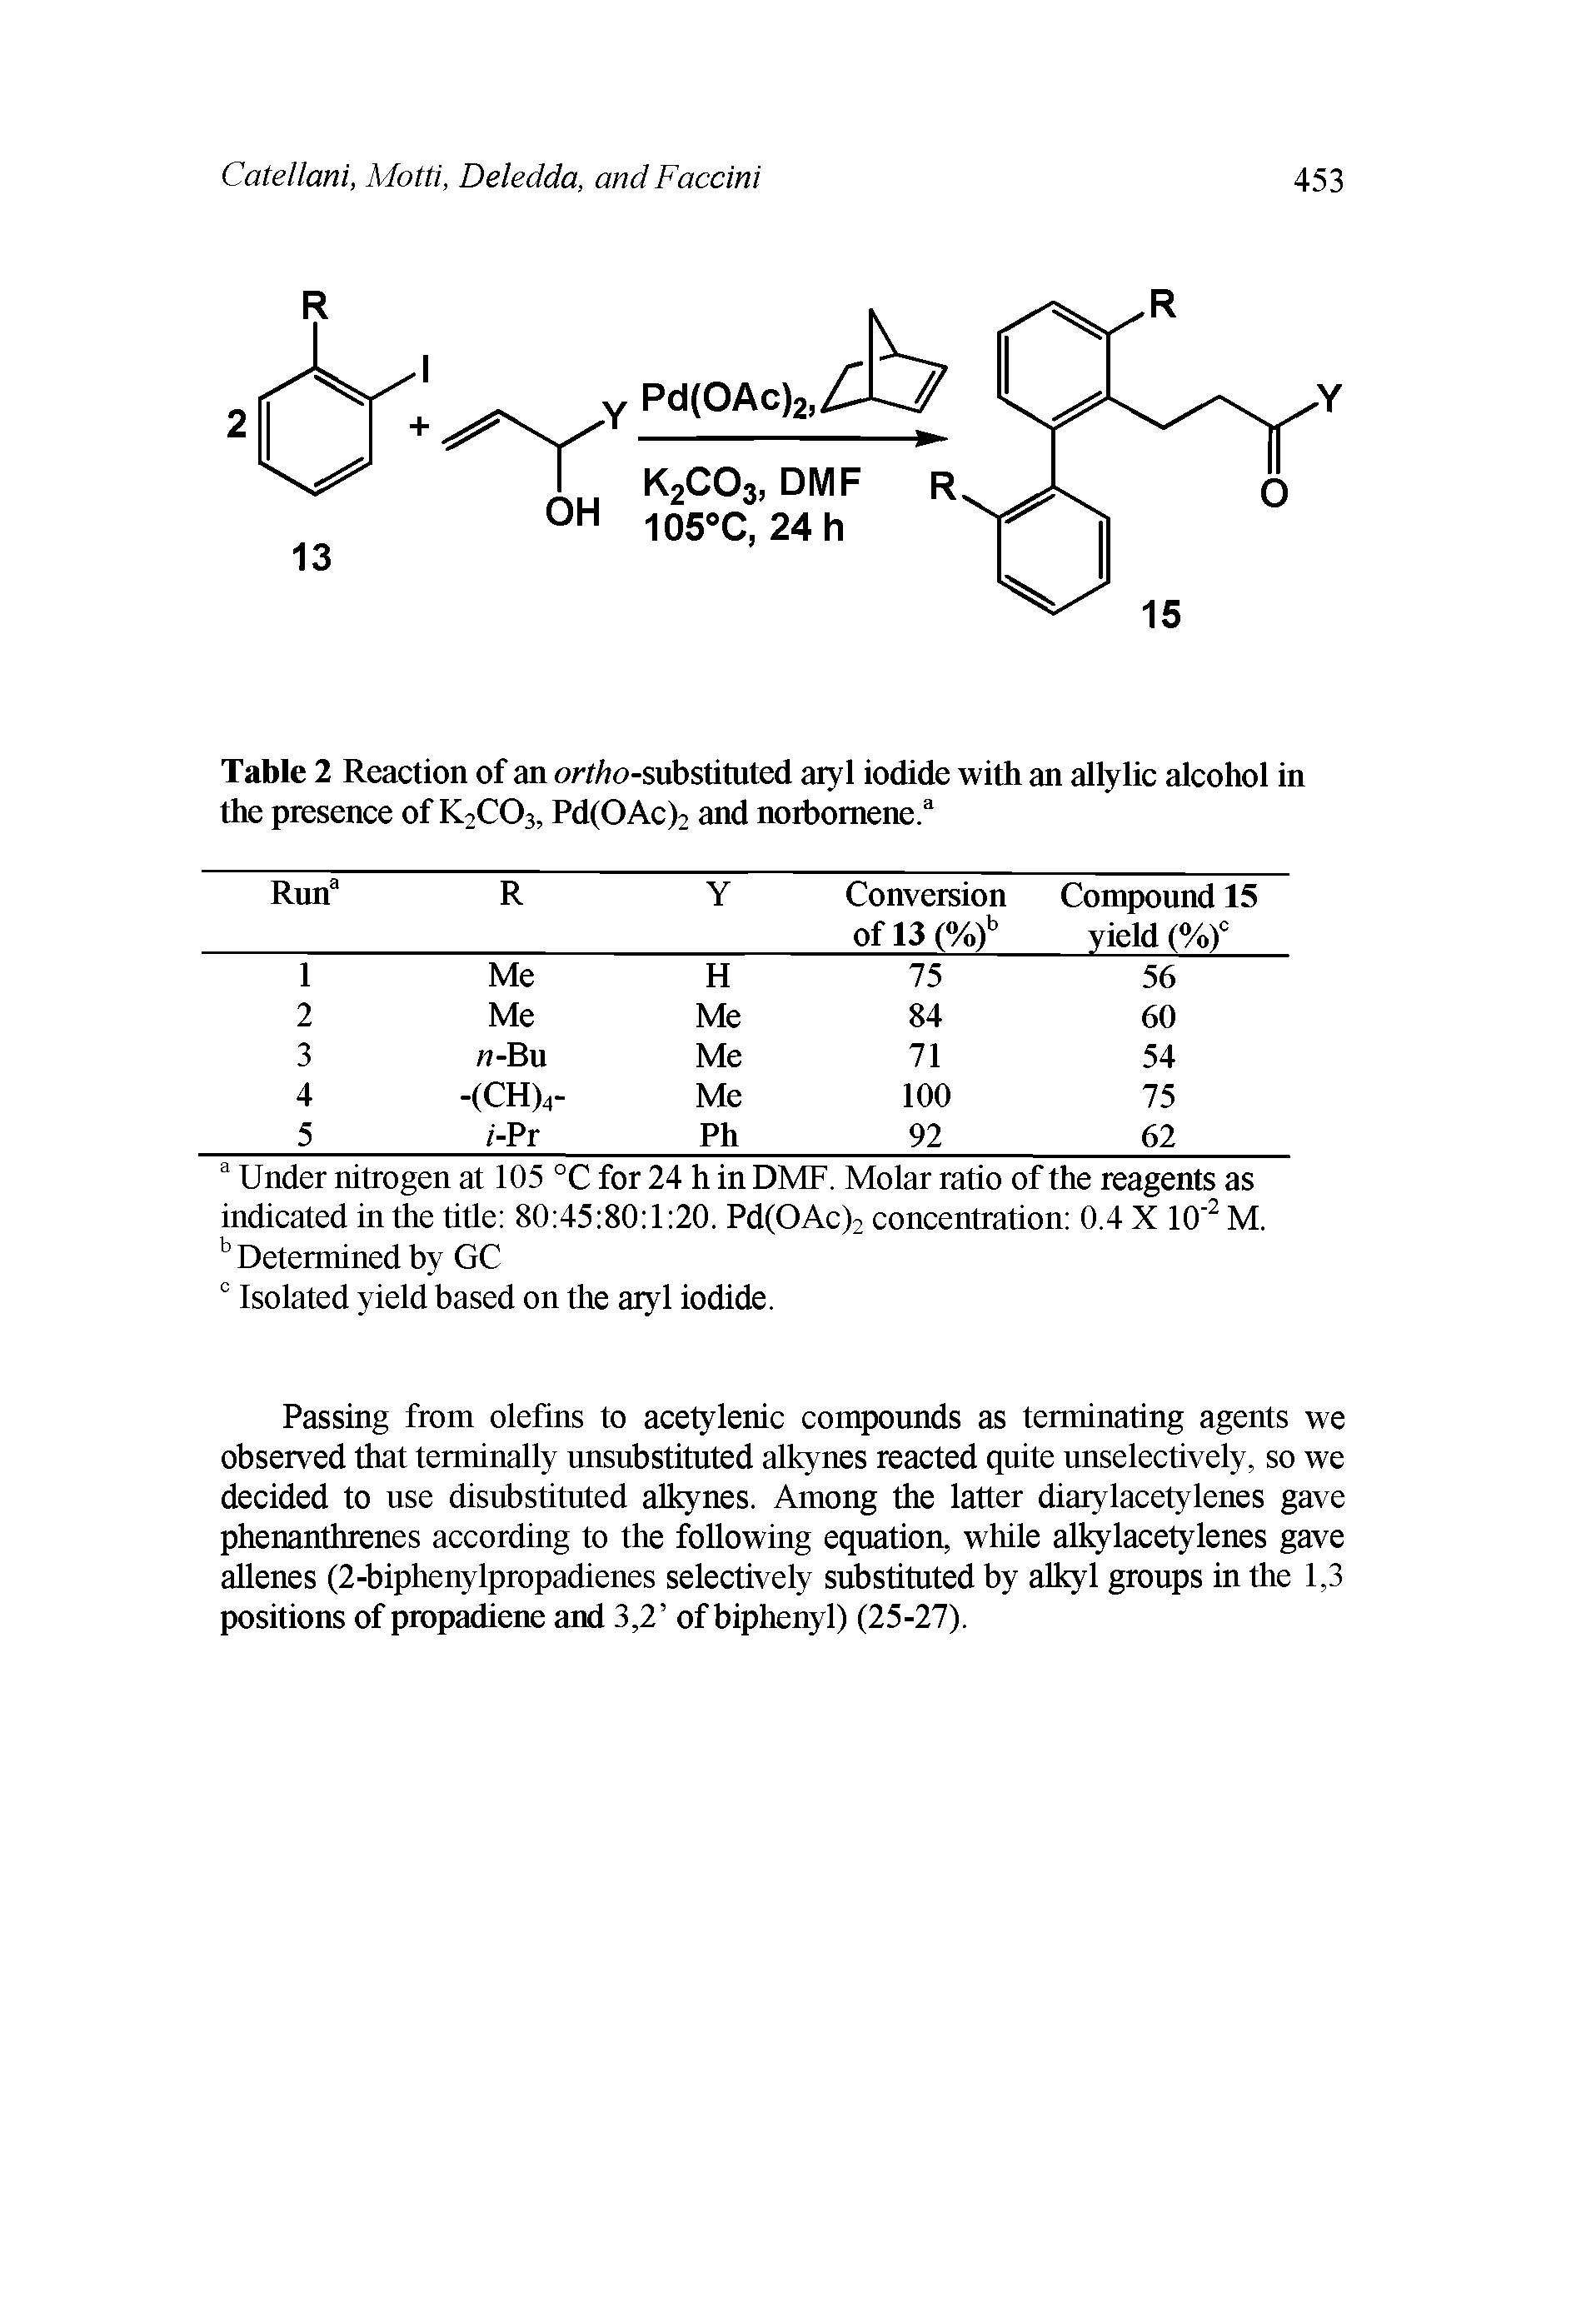 Table 2 Reaction of an orf/m-substituted aryl iodide with an allylic alcohol in the presence of K2C03, Pd(OAc)2 and norbomenc.1...